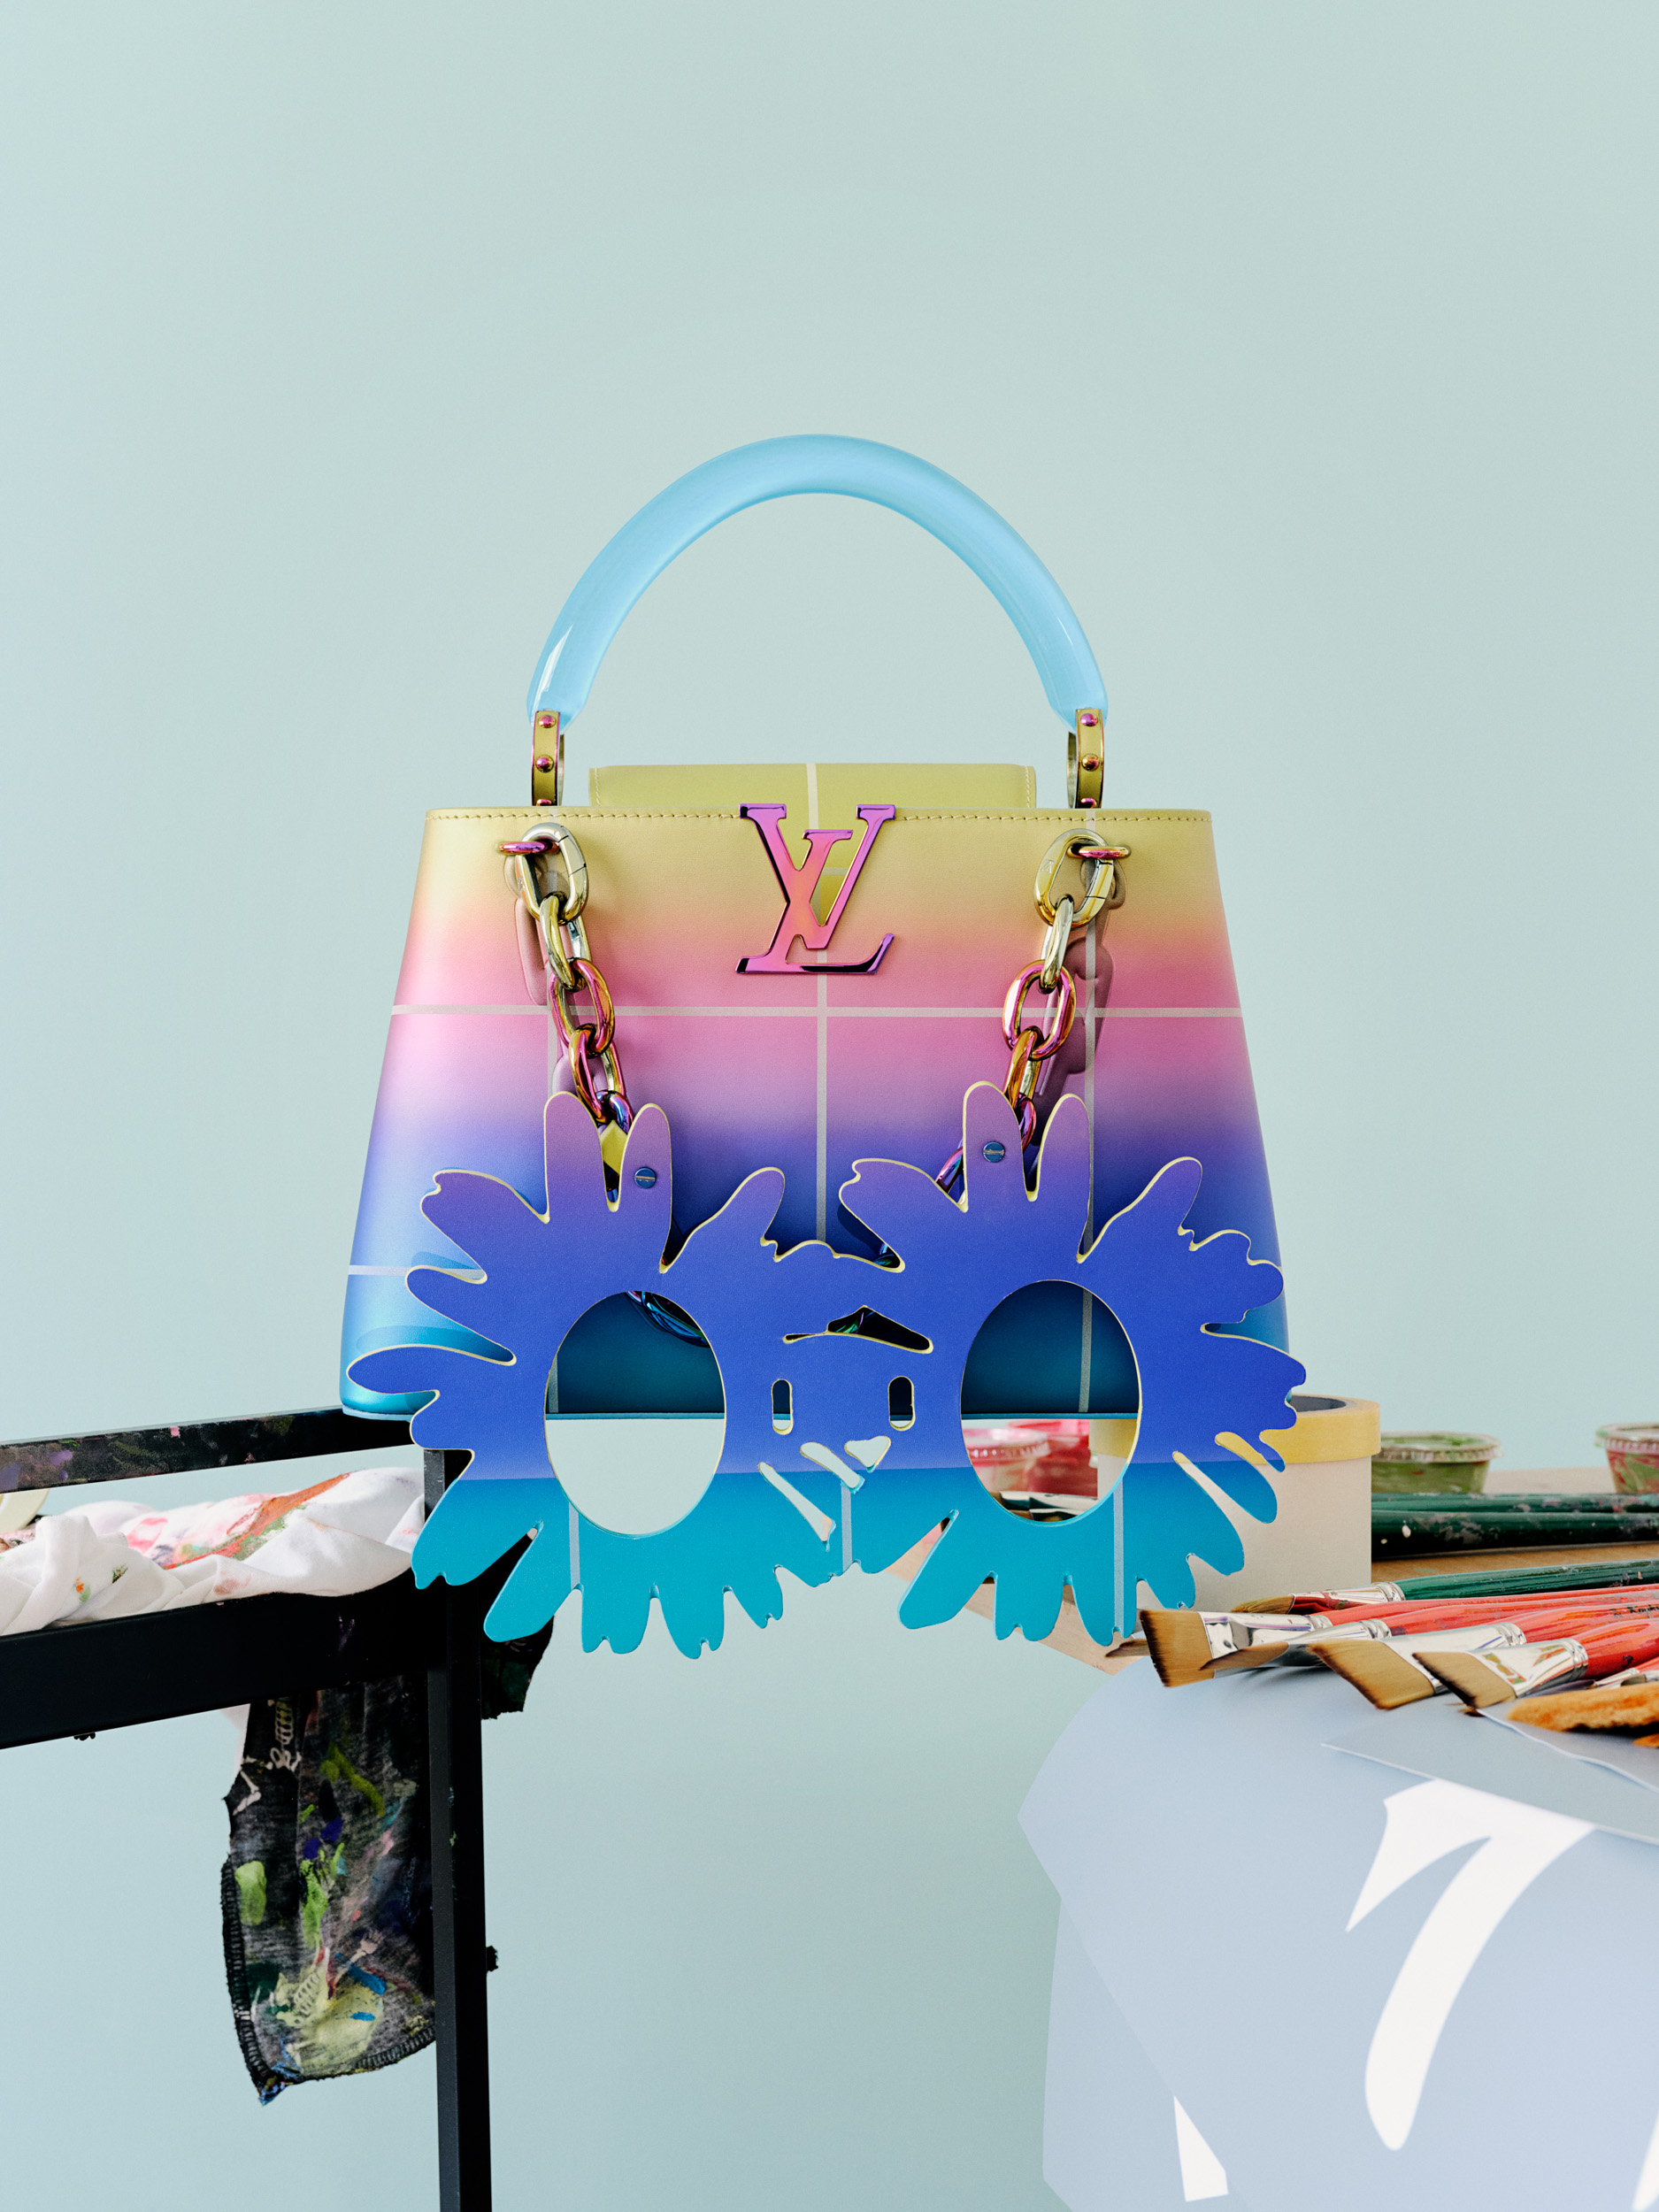 Louis Vuitton's Latest Artycapucines Collection